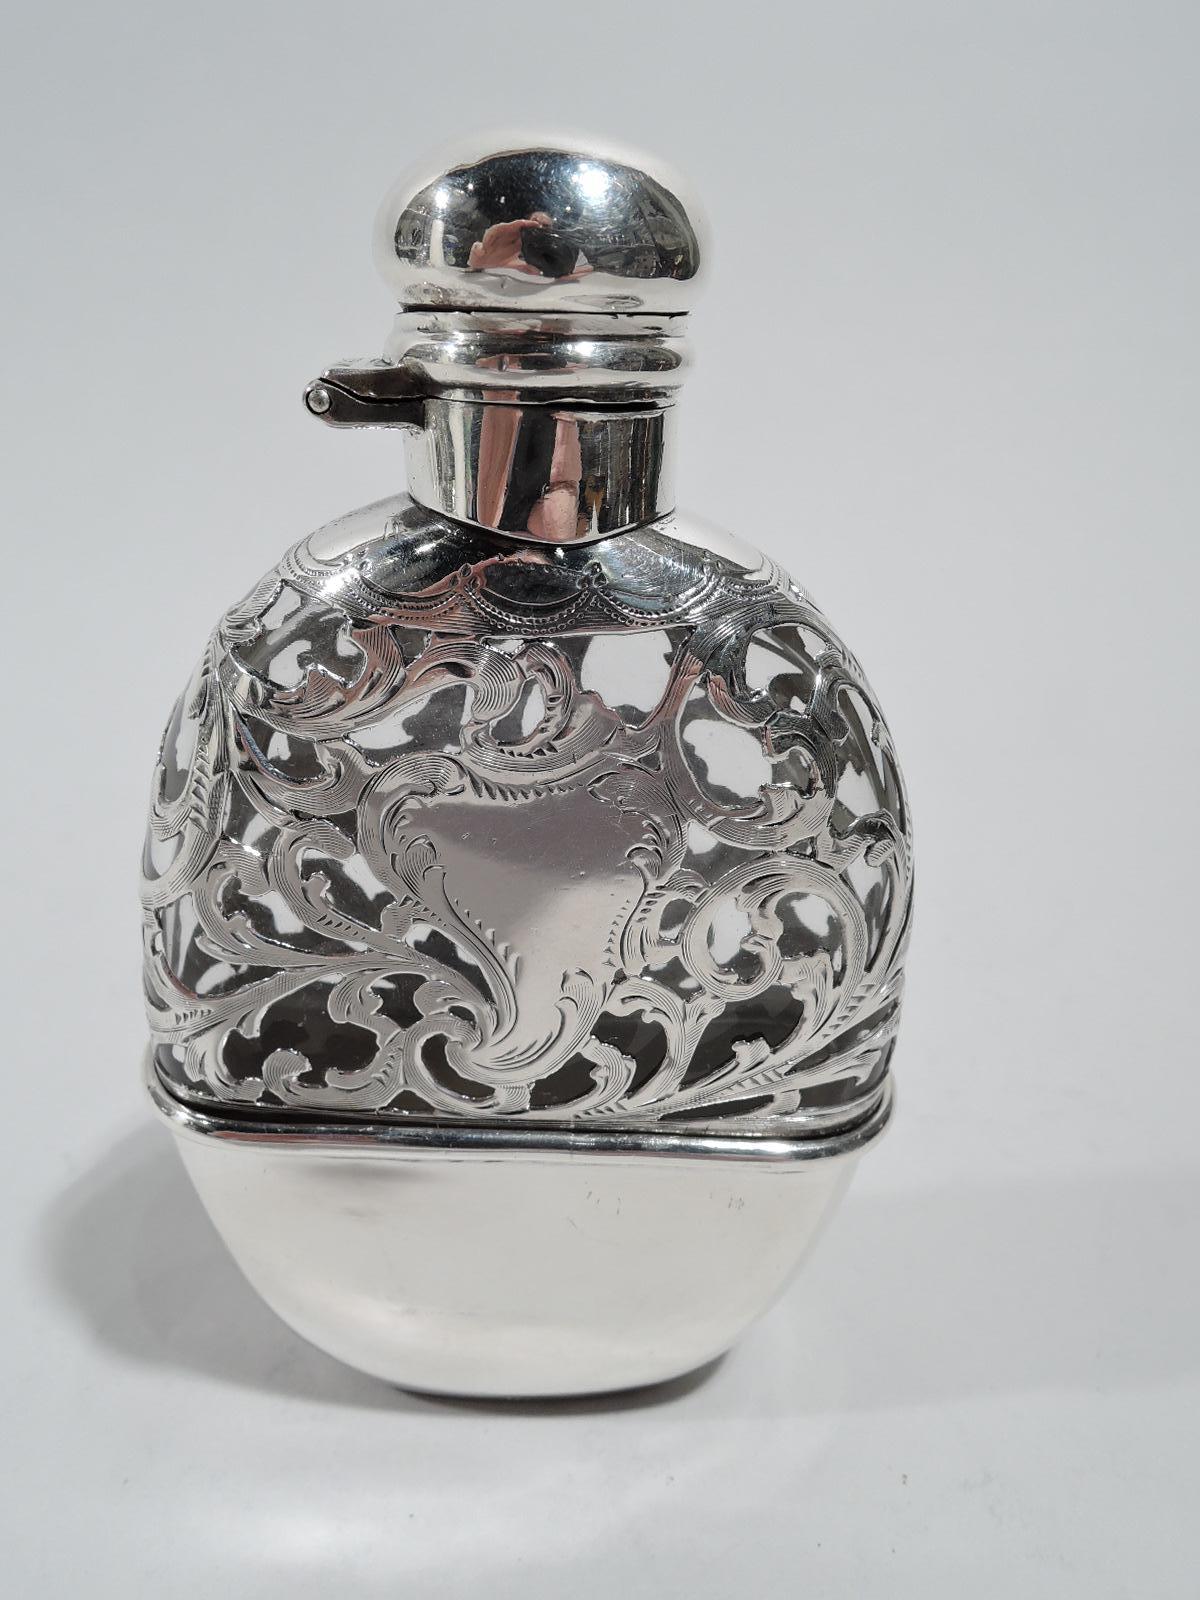 Turn-of-the-century Art Nouveau glass flask with engraved silver overlay. Made by Alvin in Providence. Ovoid body with curved sides and flat front and back. Sterling silver neck collar and hinged and cork-lined cover. Top half has silver overlay in